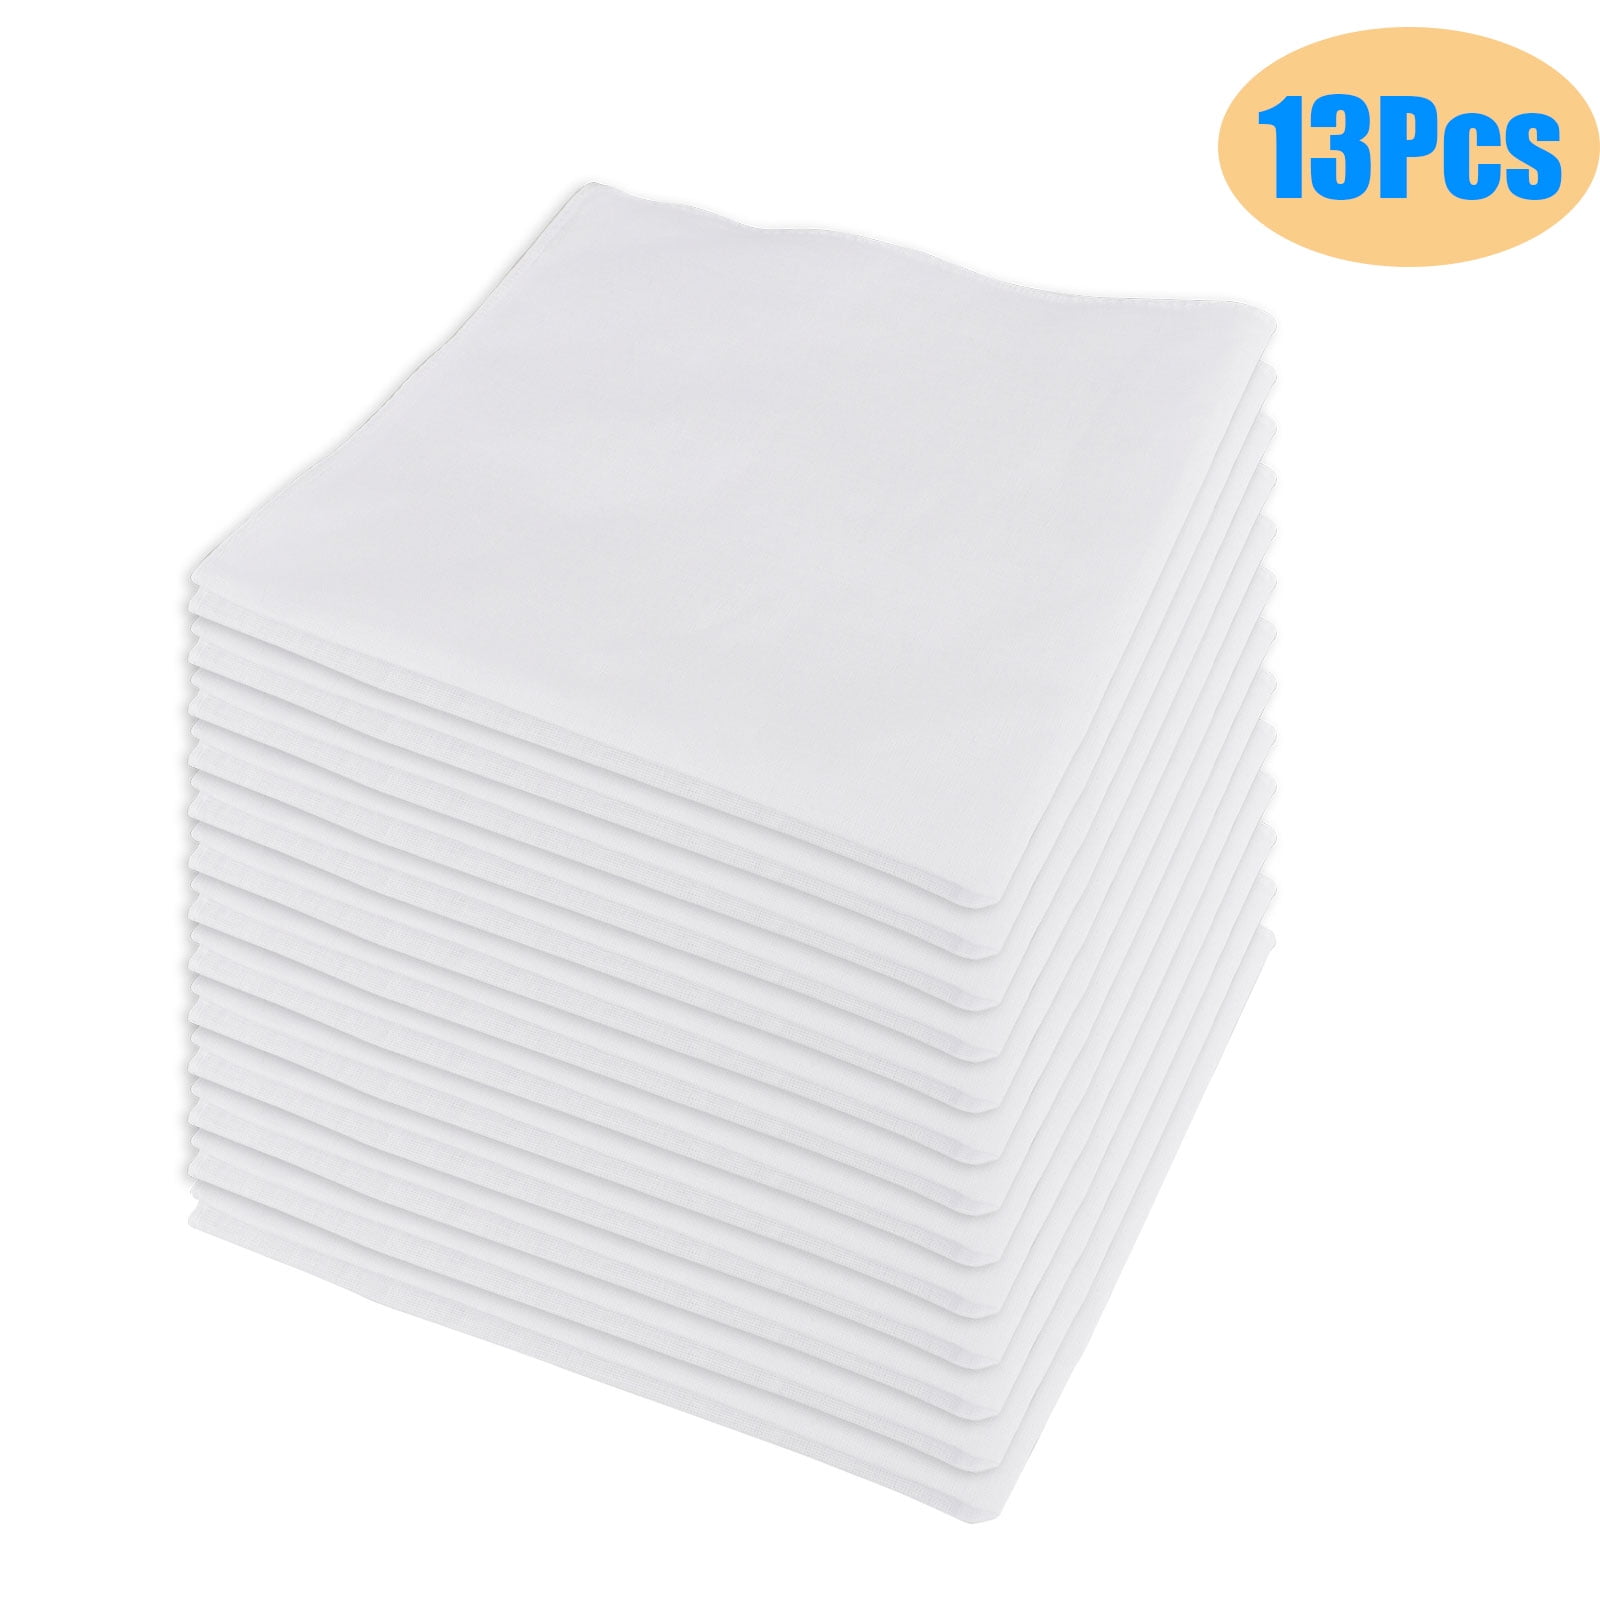 Mens Handkerchiefs Silky Soft Solid White Pure Cotton Hankies Pack of 6 